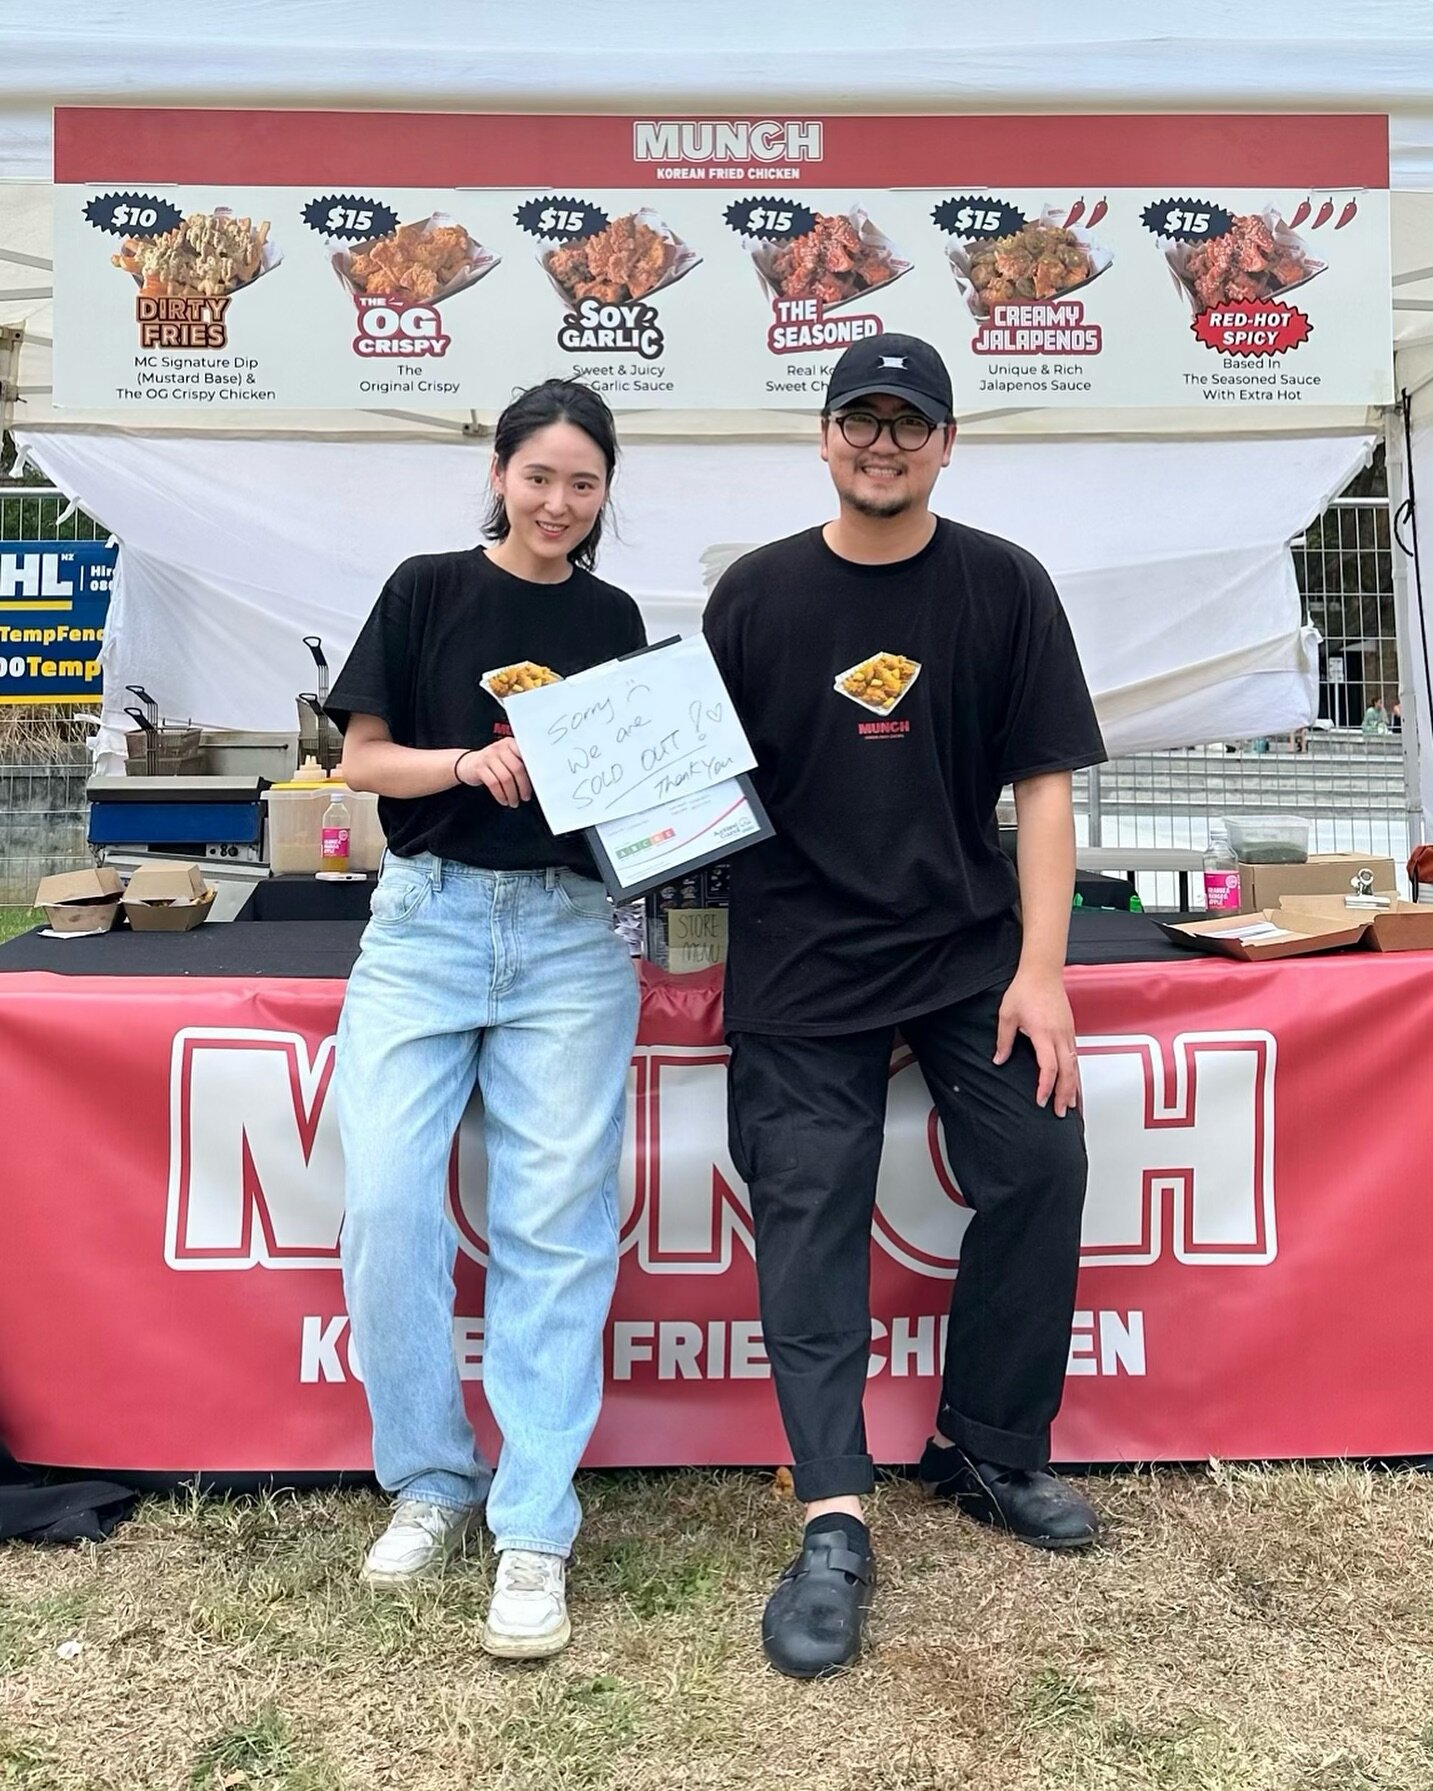 Hi MUNCH Fam!🍗
We&rsquo;re Jun &amp; Sowon, serving up some seriously delicious Korean fried chicken with a twist! As owners and chefs, we&rsquo;re the brains, or as we like to call ourselves, the dynamic duo behind the operation of MUNCH :)

We wou